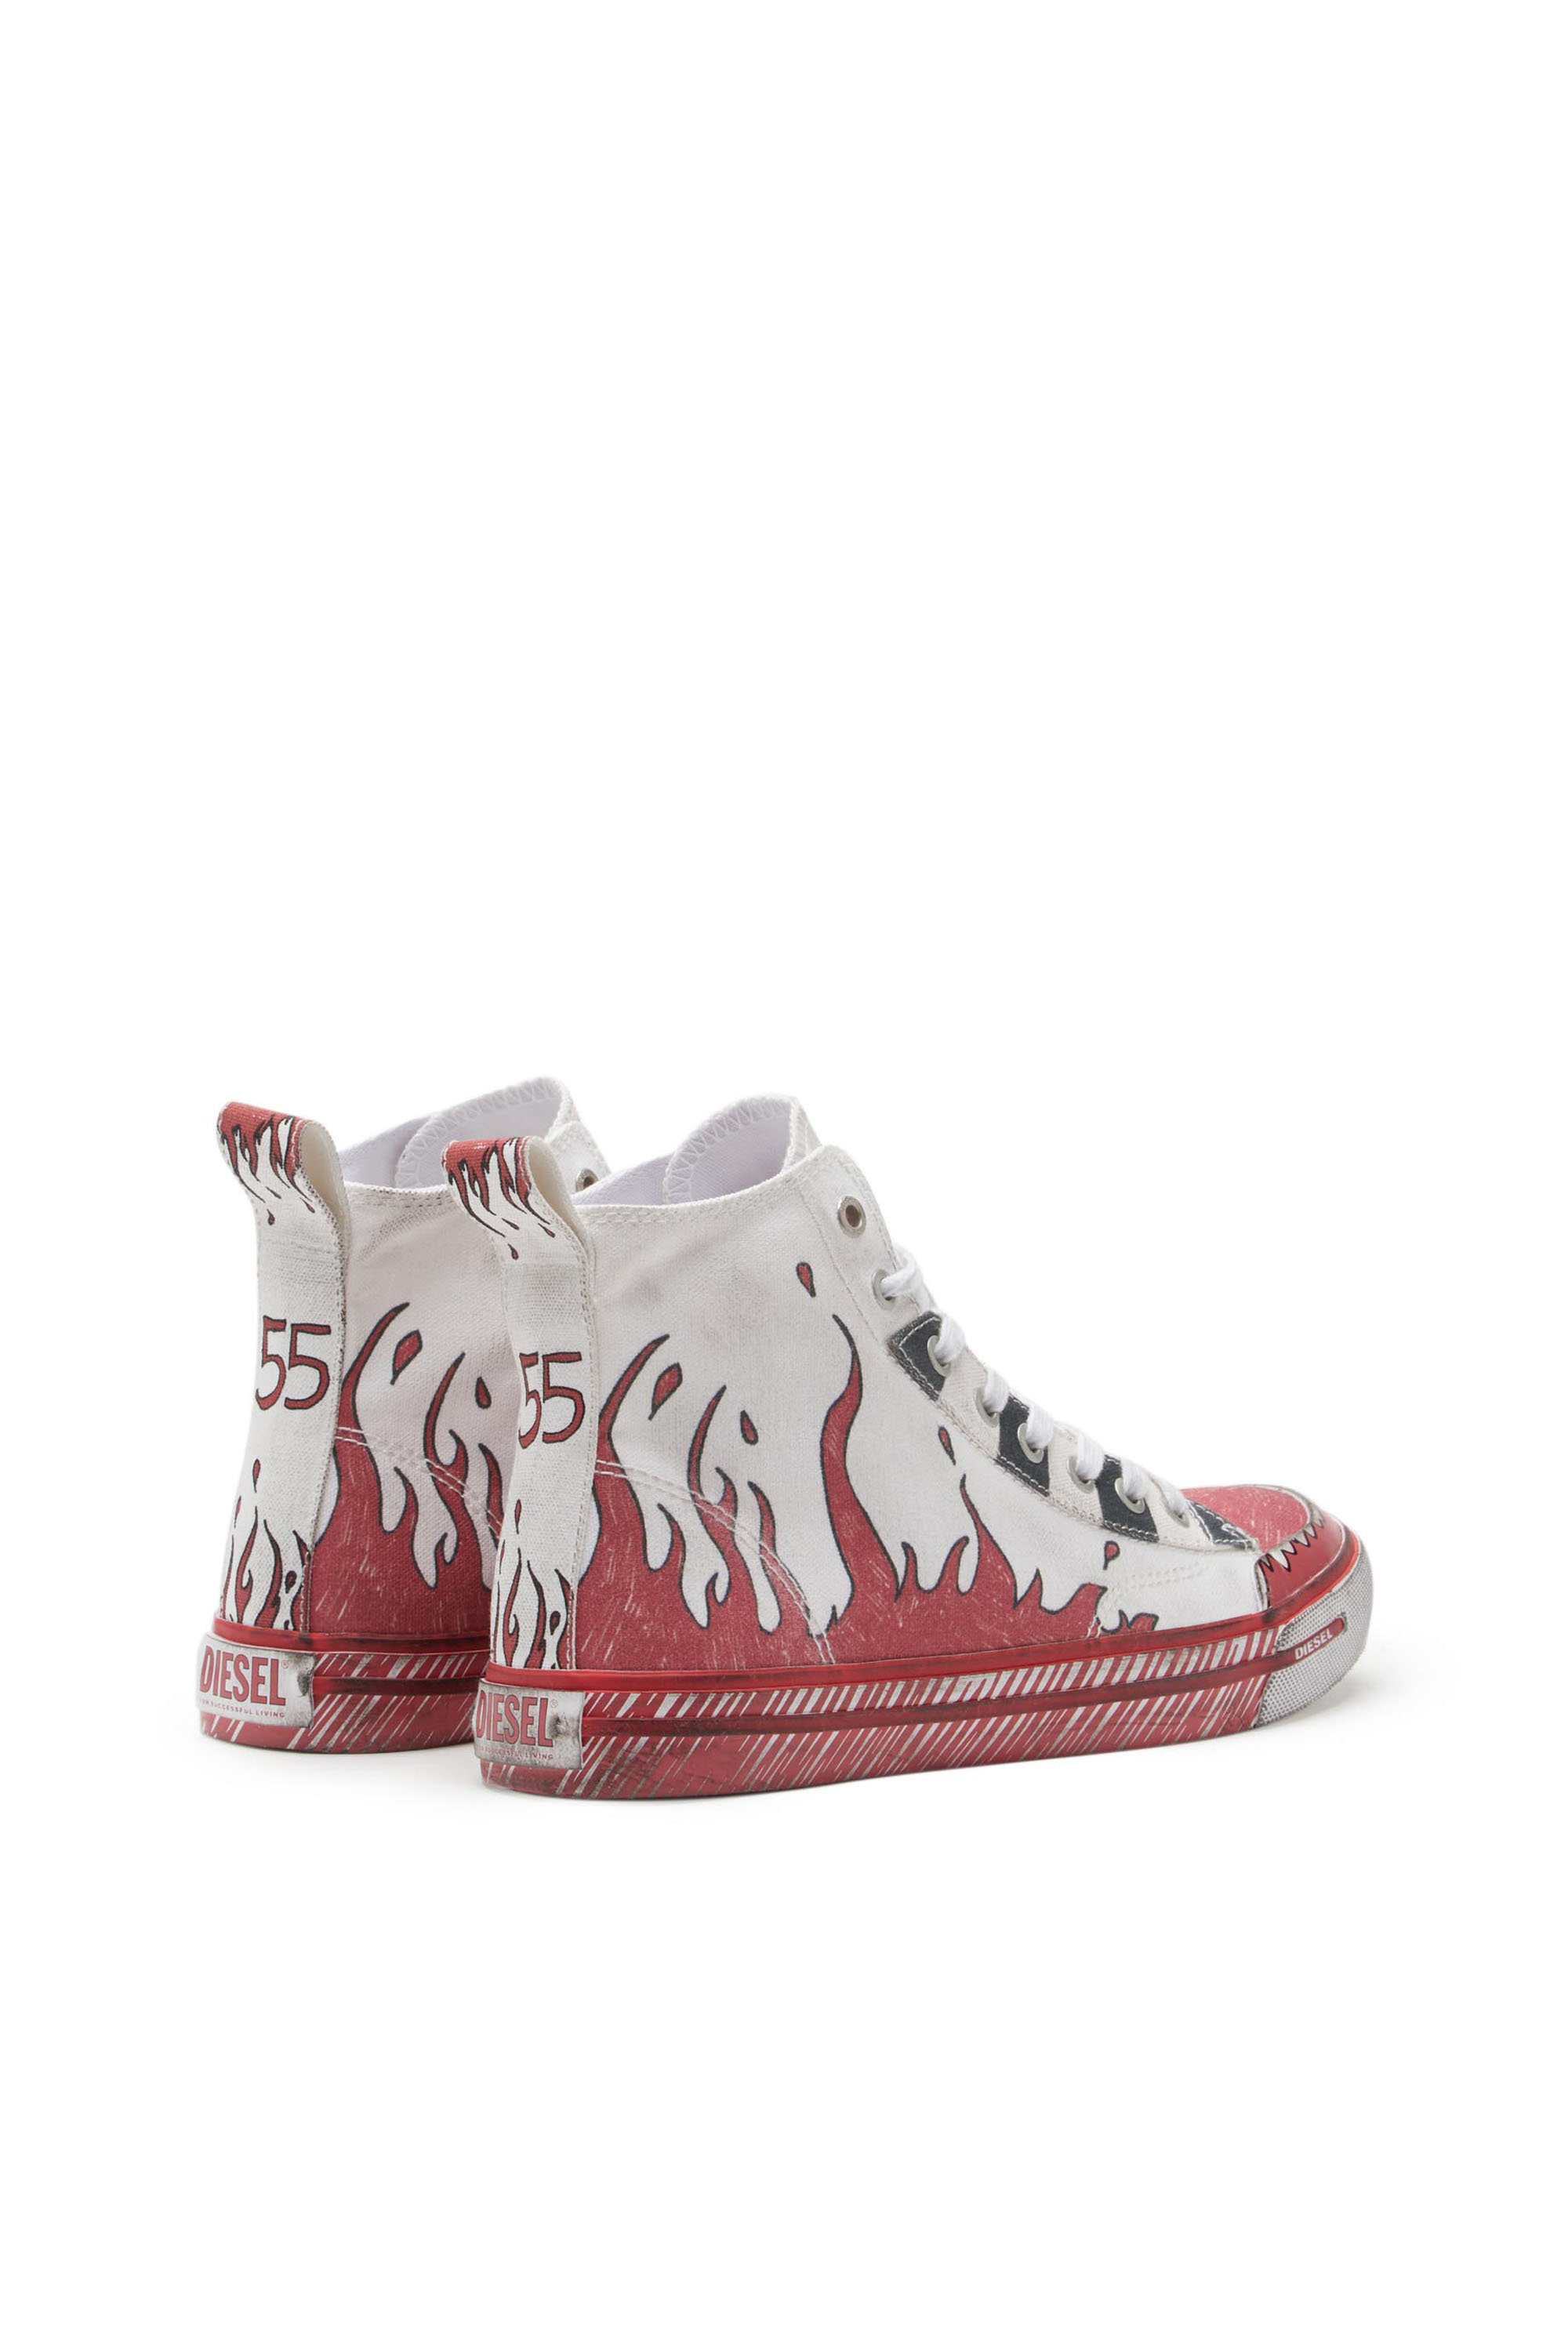 Diesel - S-ATHOS MID W, Weiss/Rot - Image 3